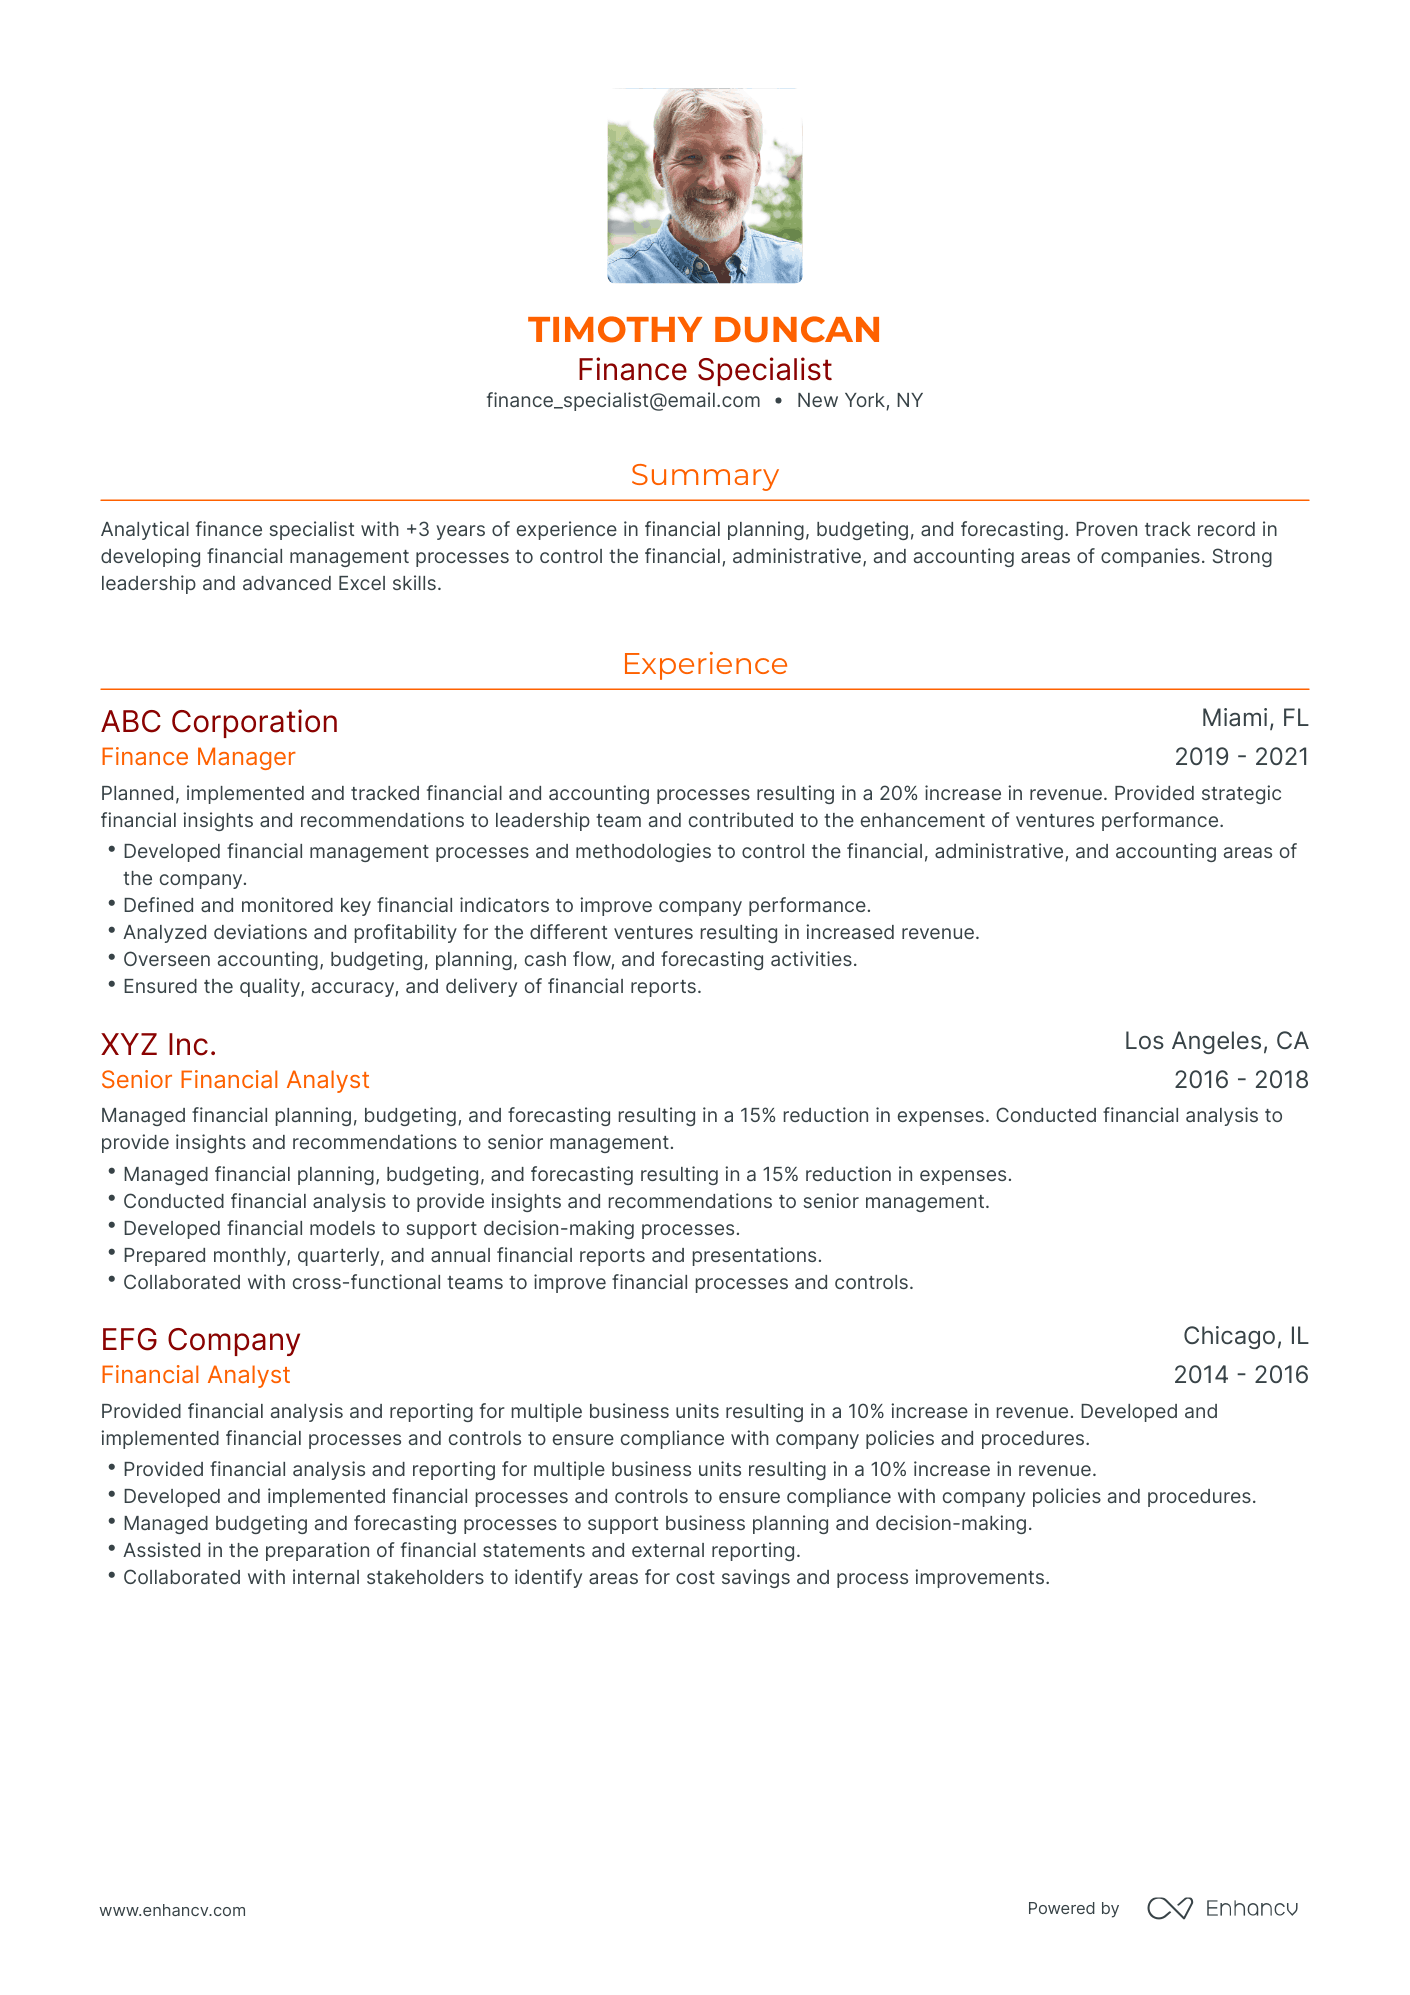 Traditional Finance Specialist Resume Template